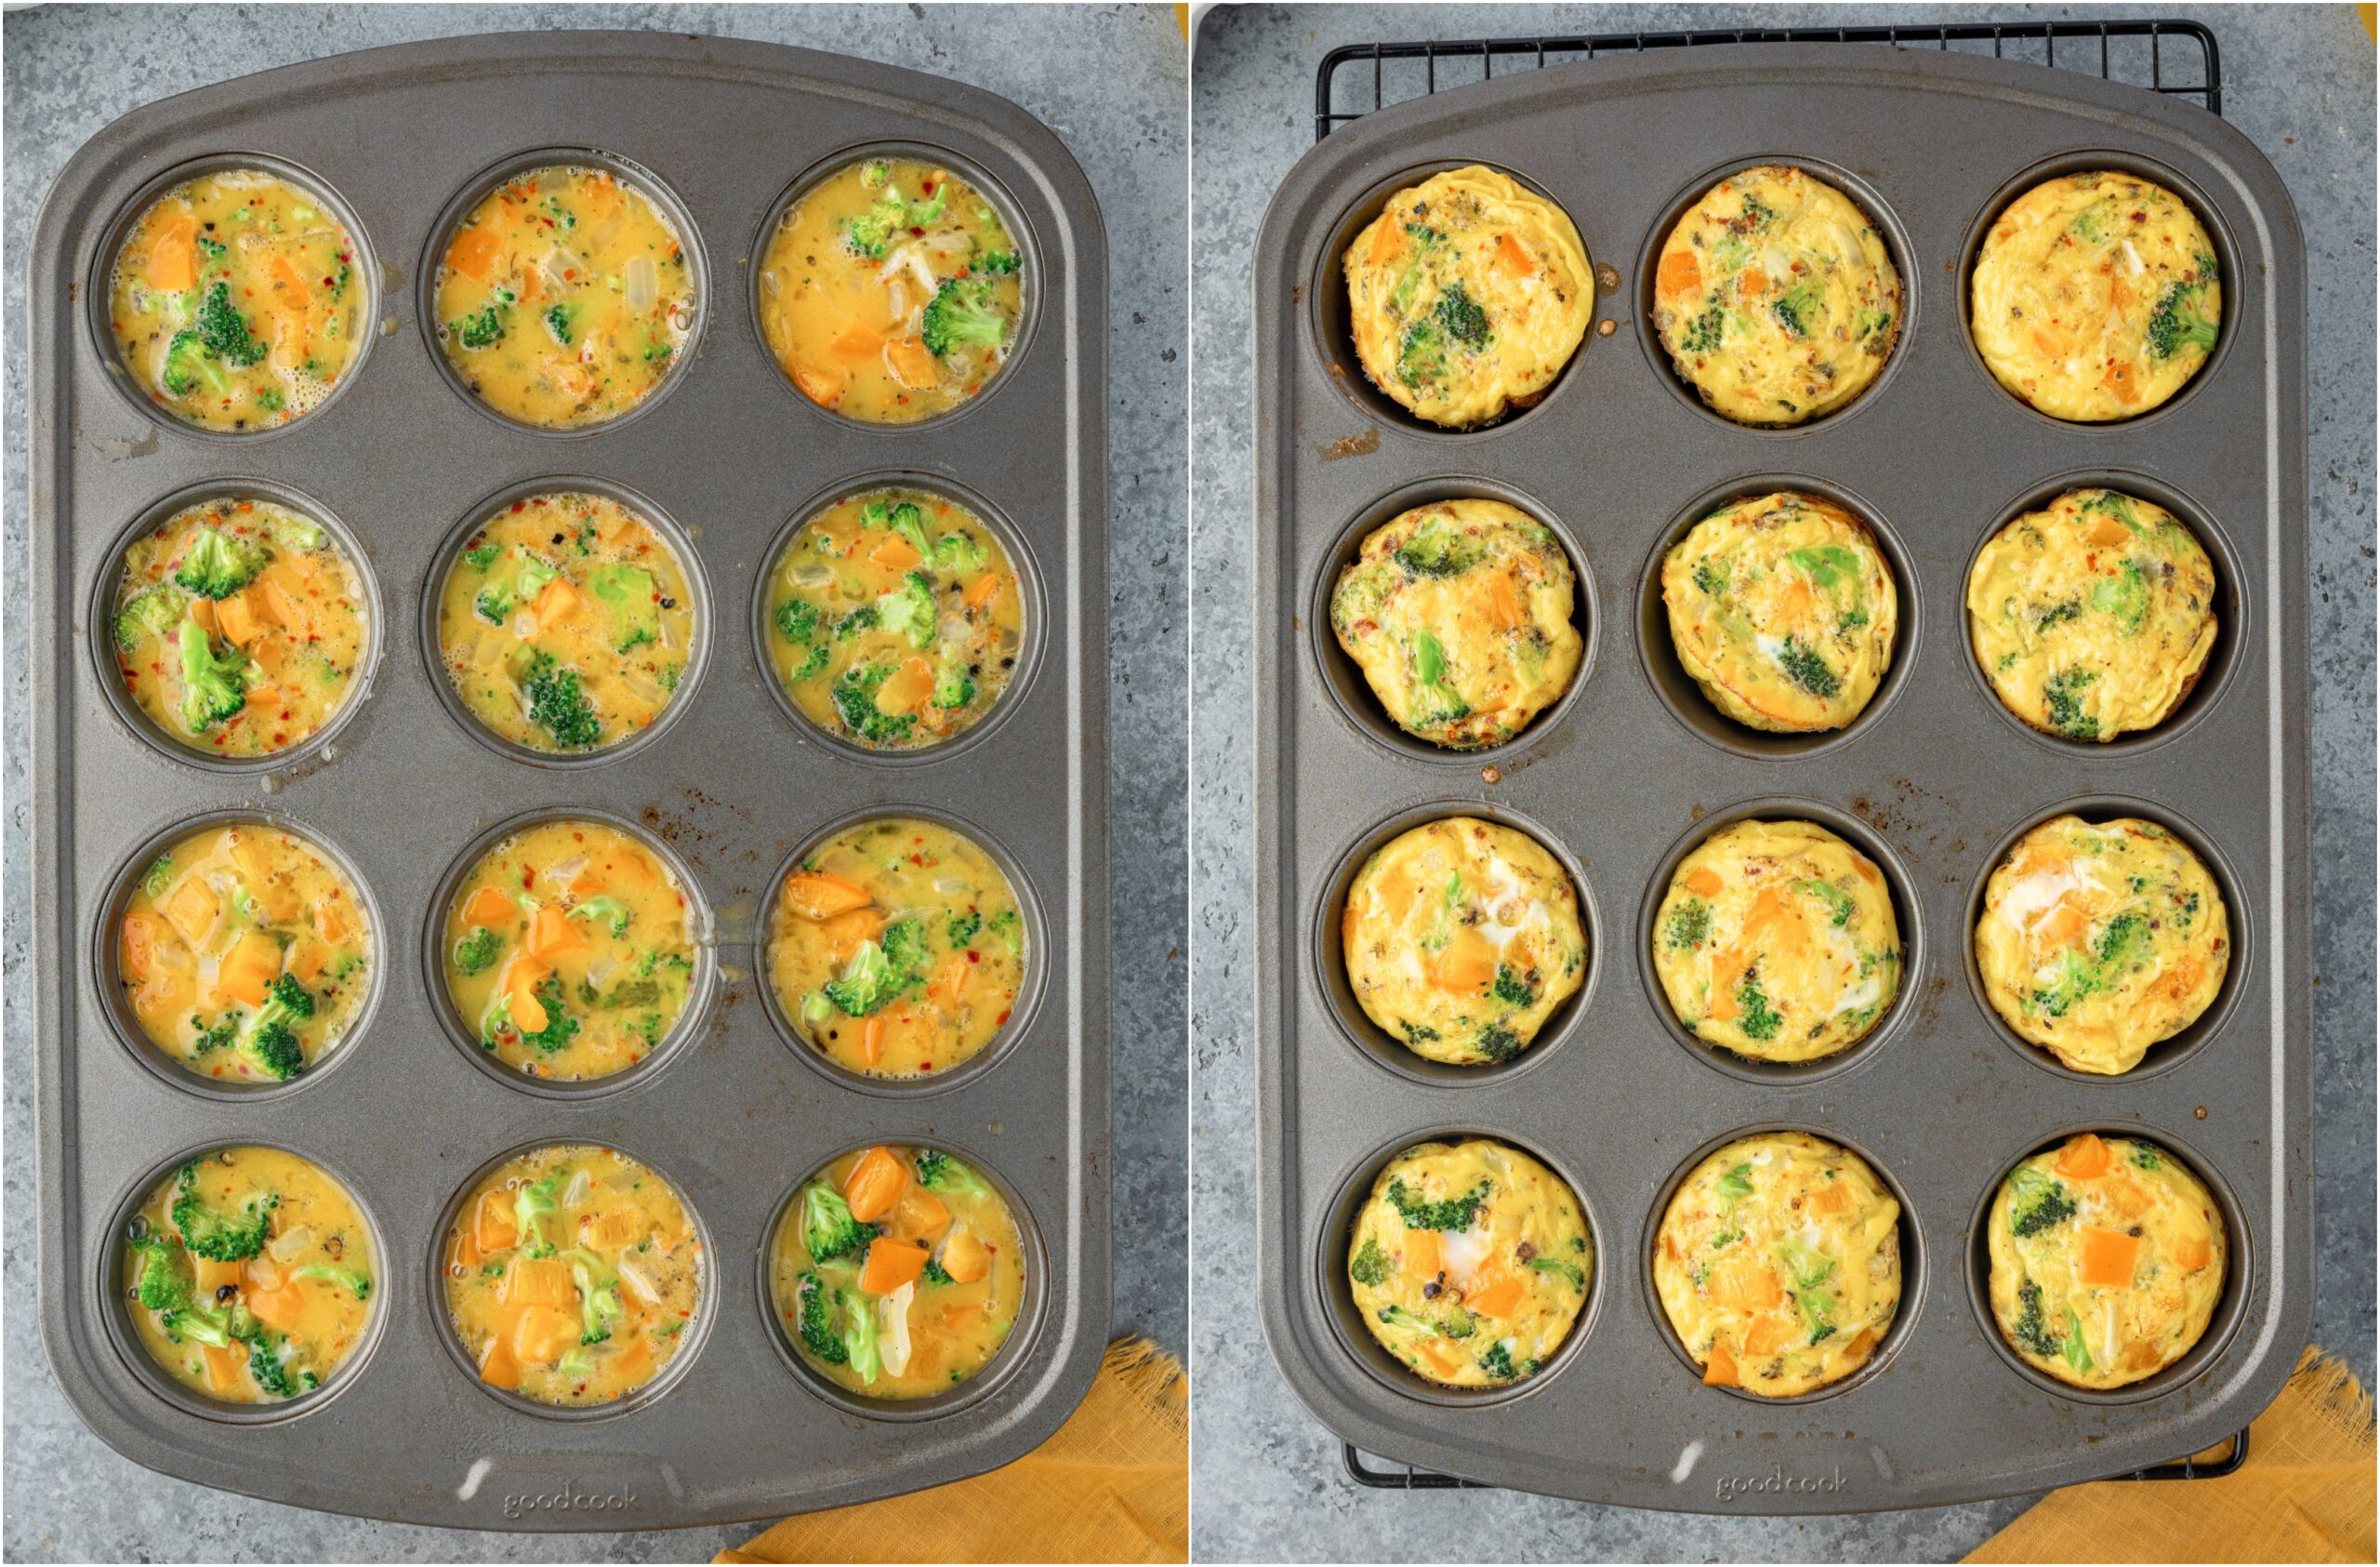 Egg breakfast muffins baked in a muffin pan.